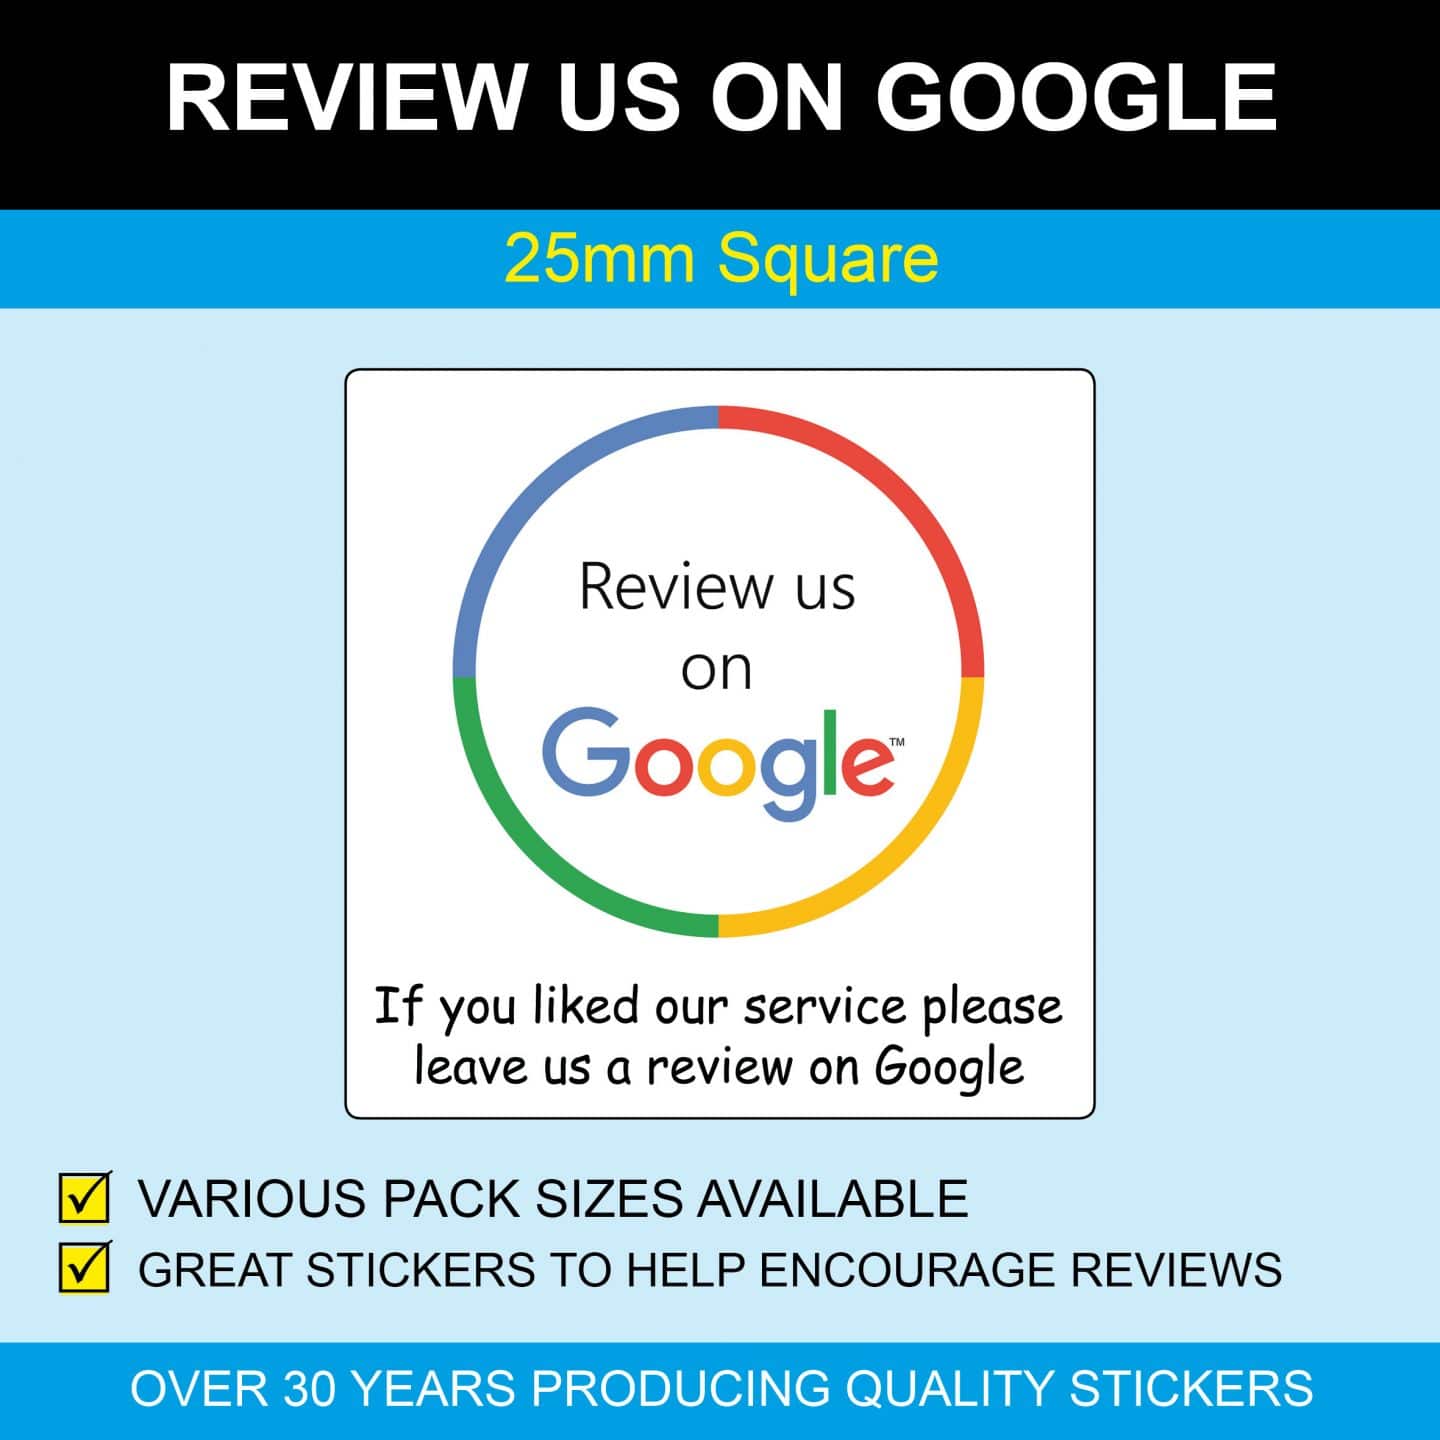 Review Us On Google Stickers 25mm Square (1 Inch Square)